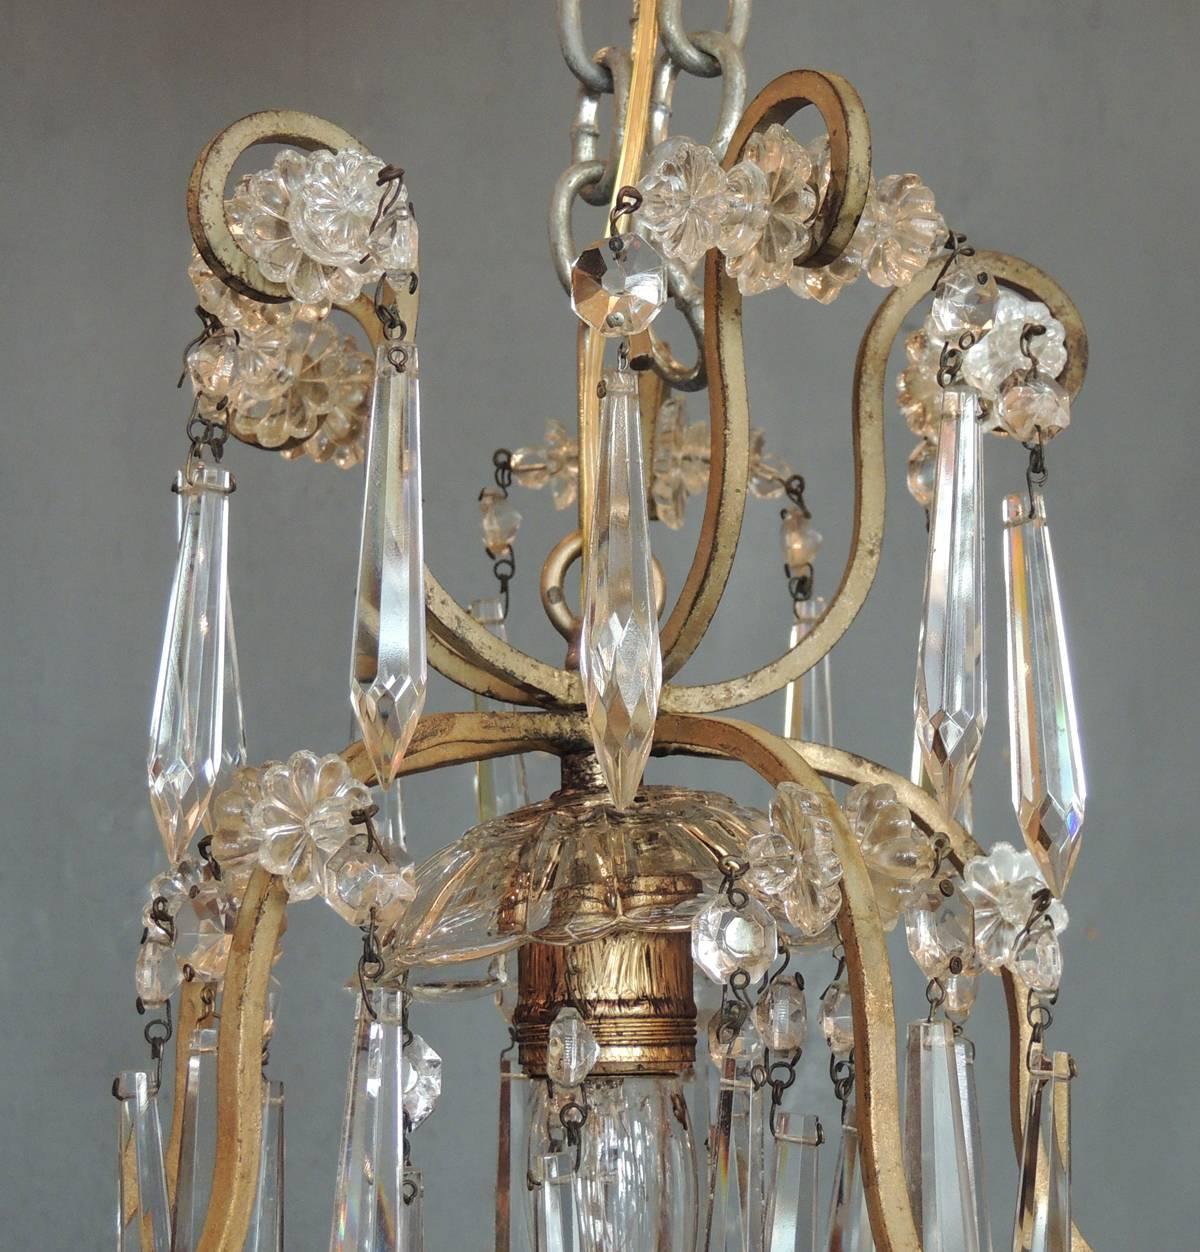 This small French Neoclassical brass and crystal chandelier lantern made in the first half of the 20th century, circa 1910. The body of the chandelier is a stylized birdcage shape decorated with crystal prisms, rosettes and drops. The fixture has